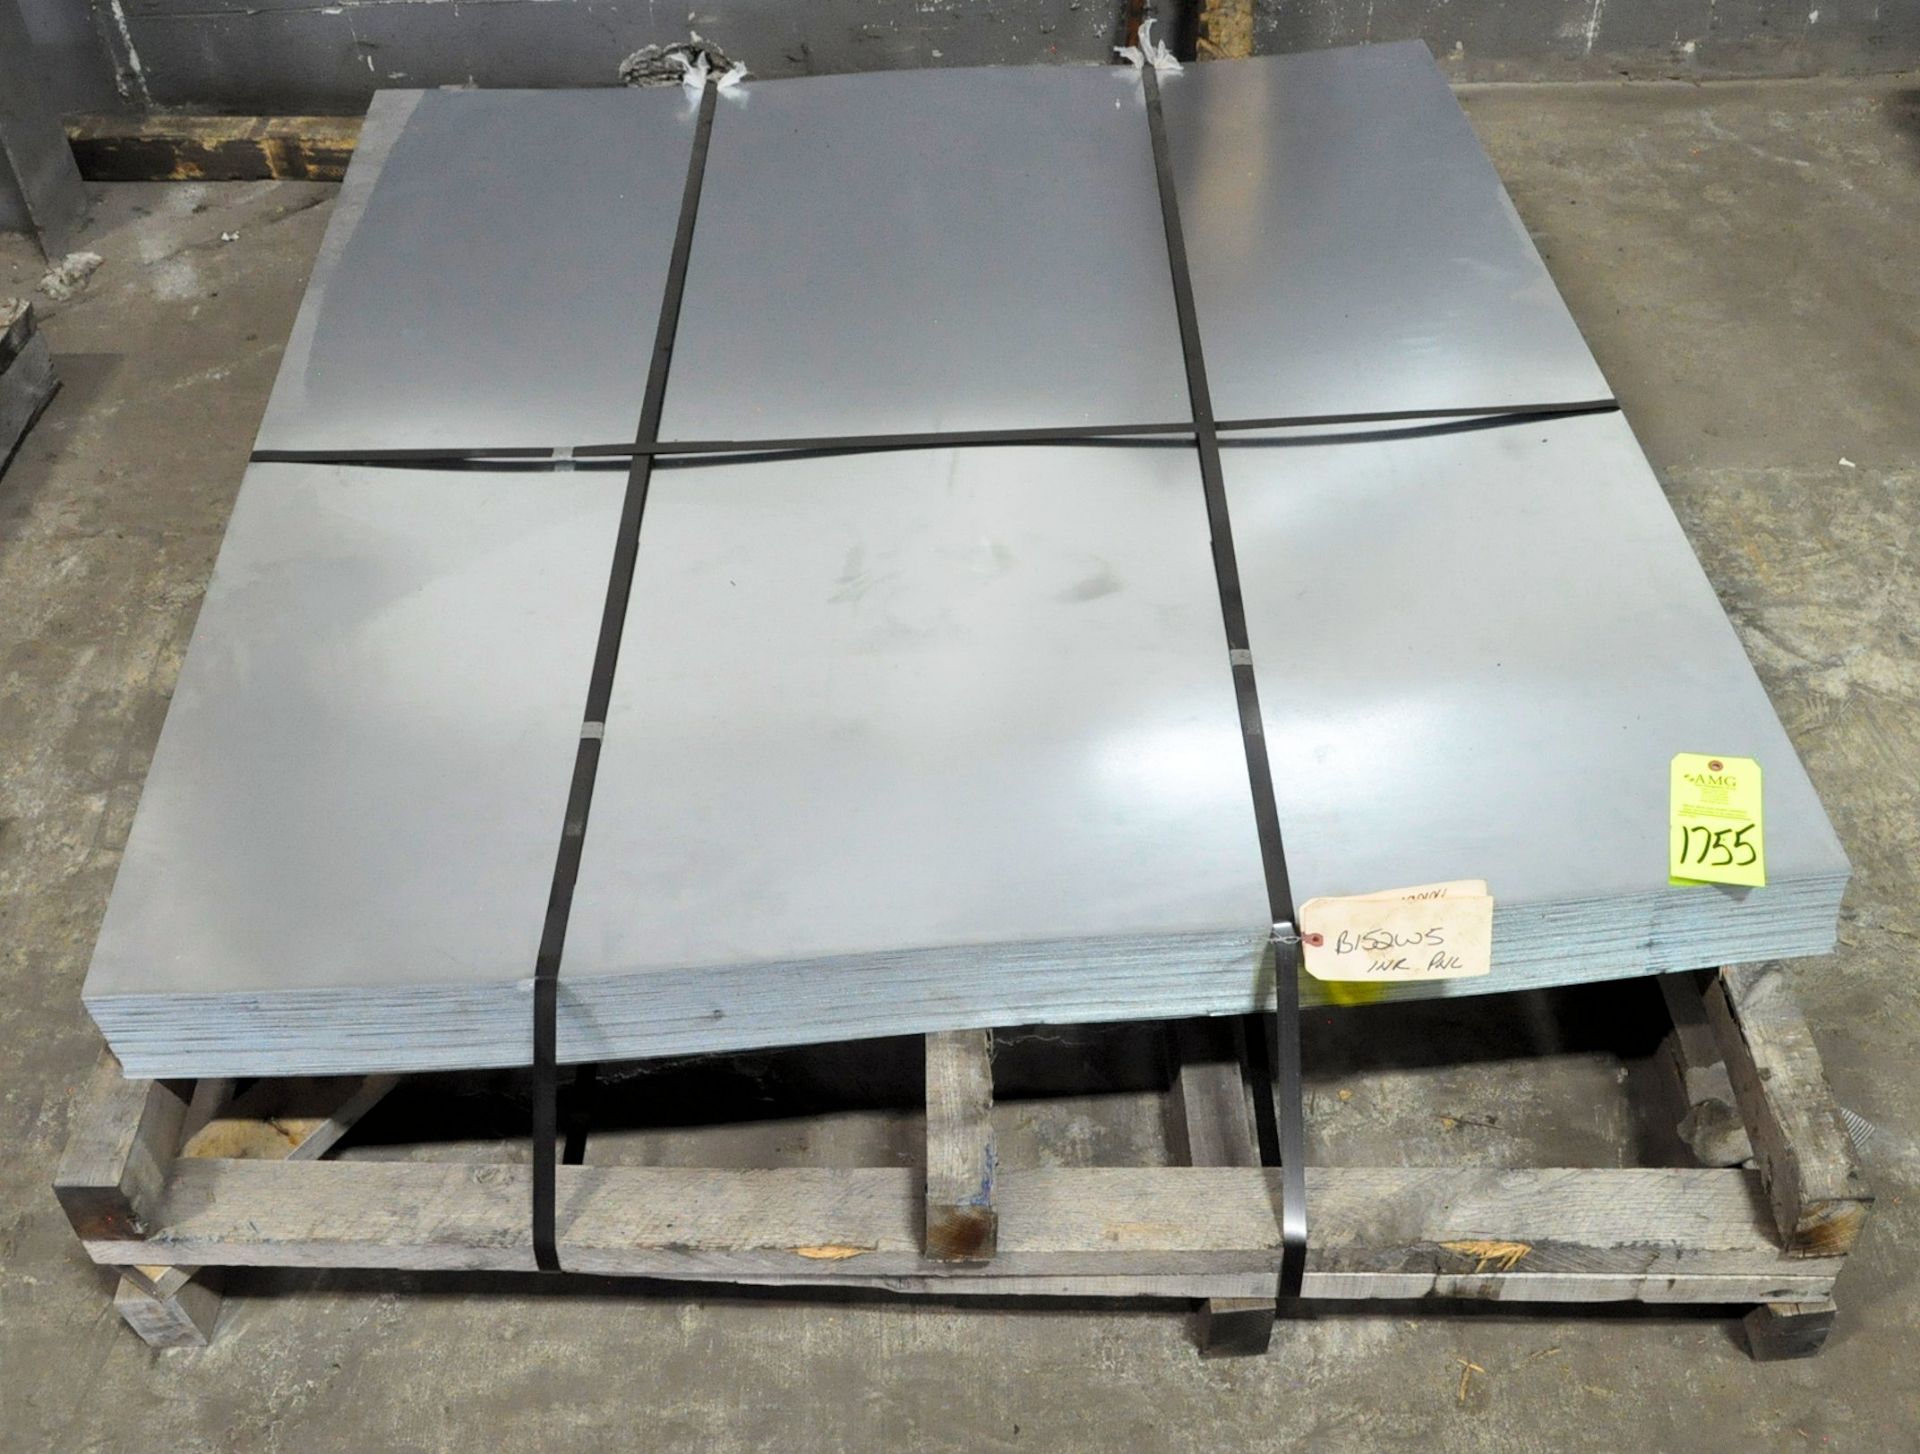 Lot-Misc. Sheet Metal Stock Cutoffs on (1) Pallet, (Warehouse Room), (Yellow Tag)